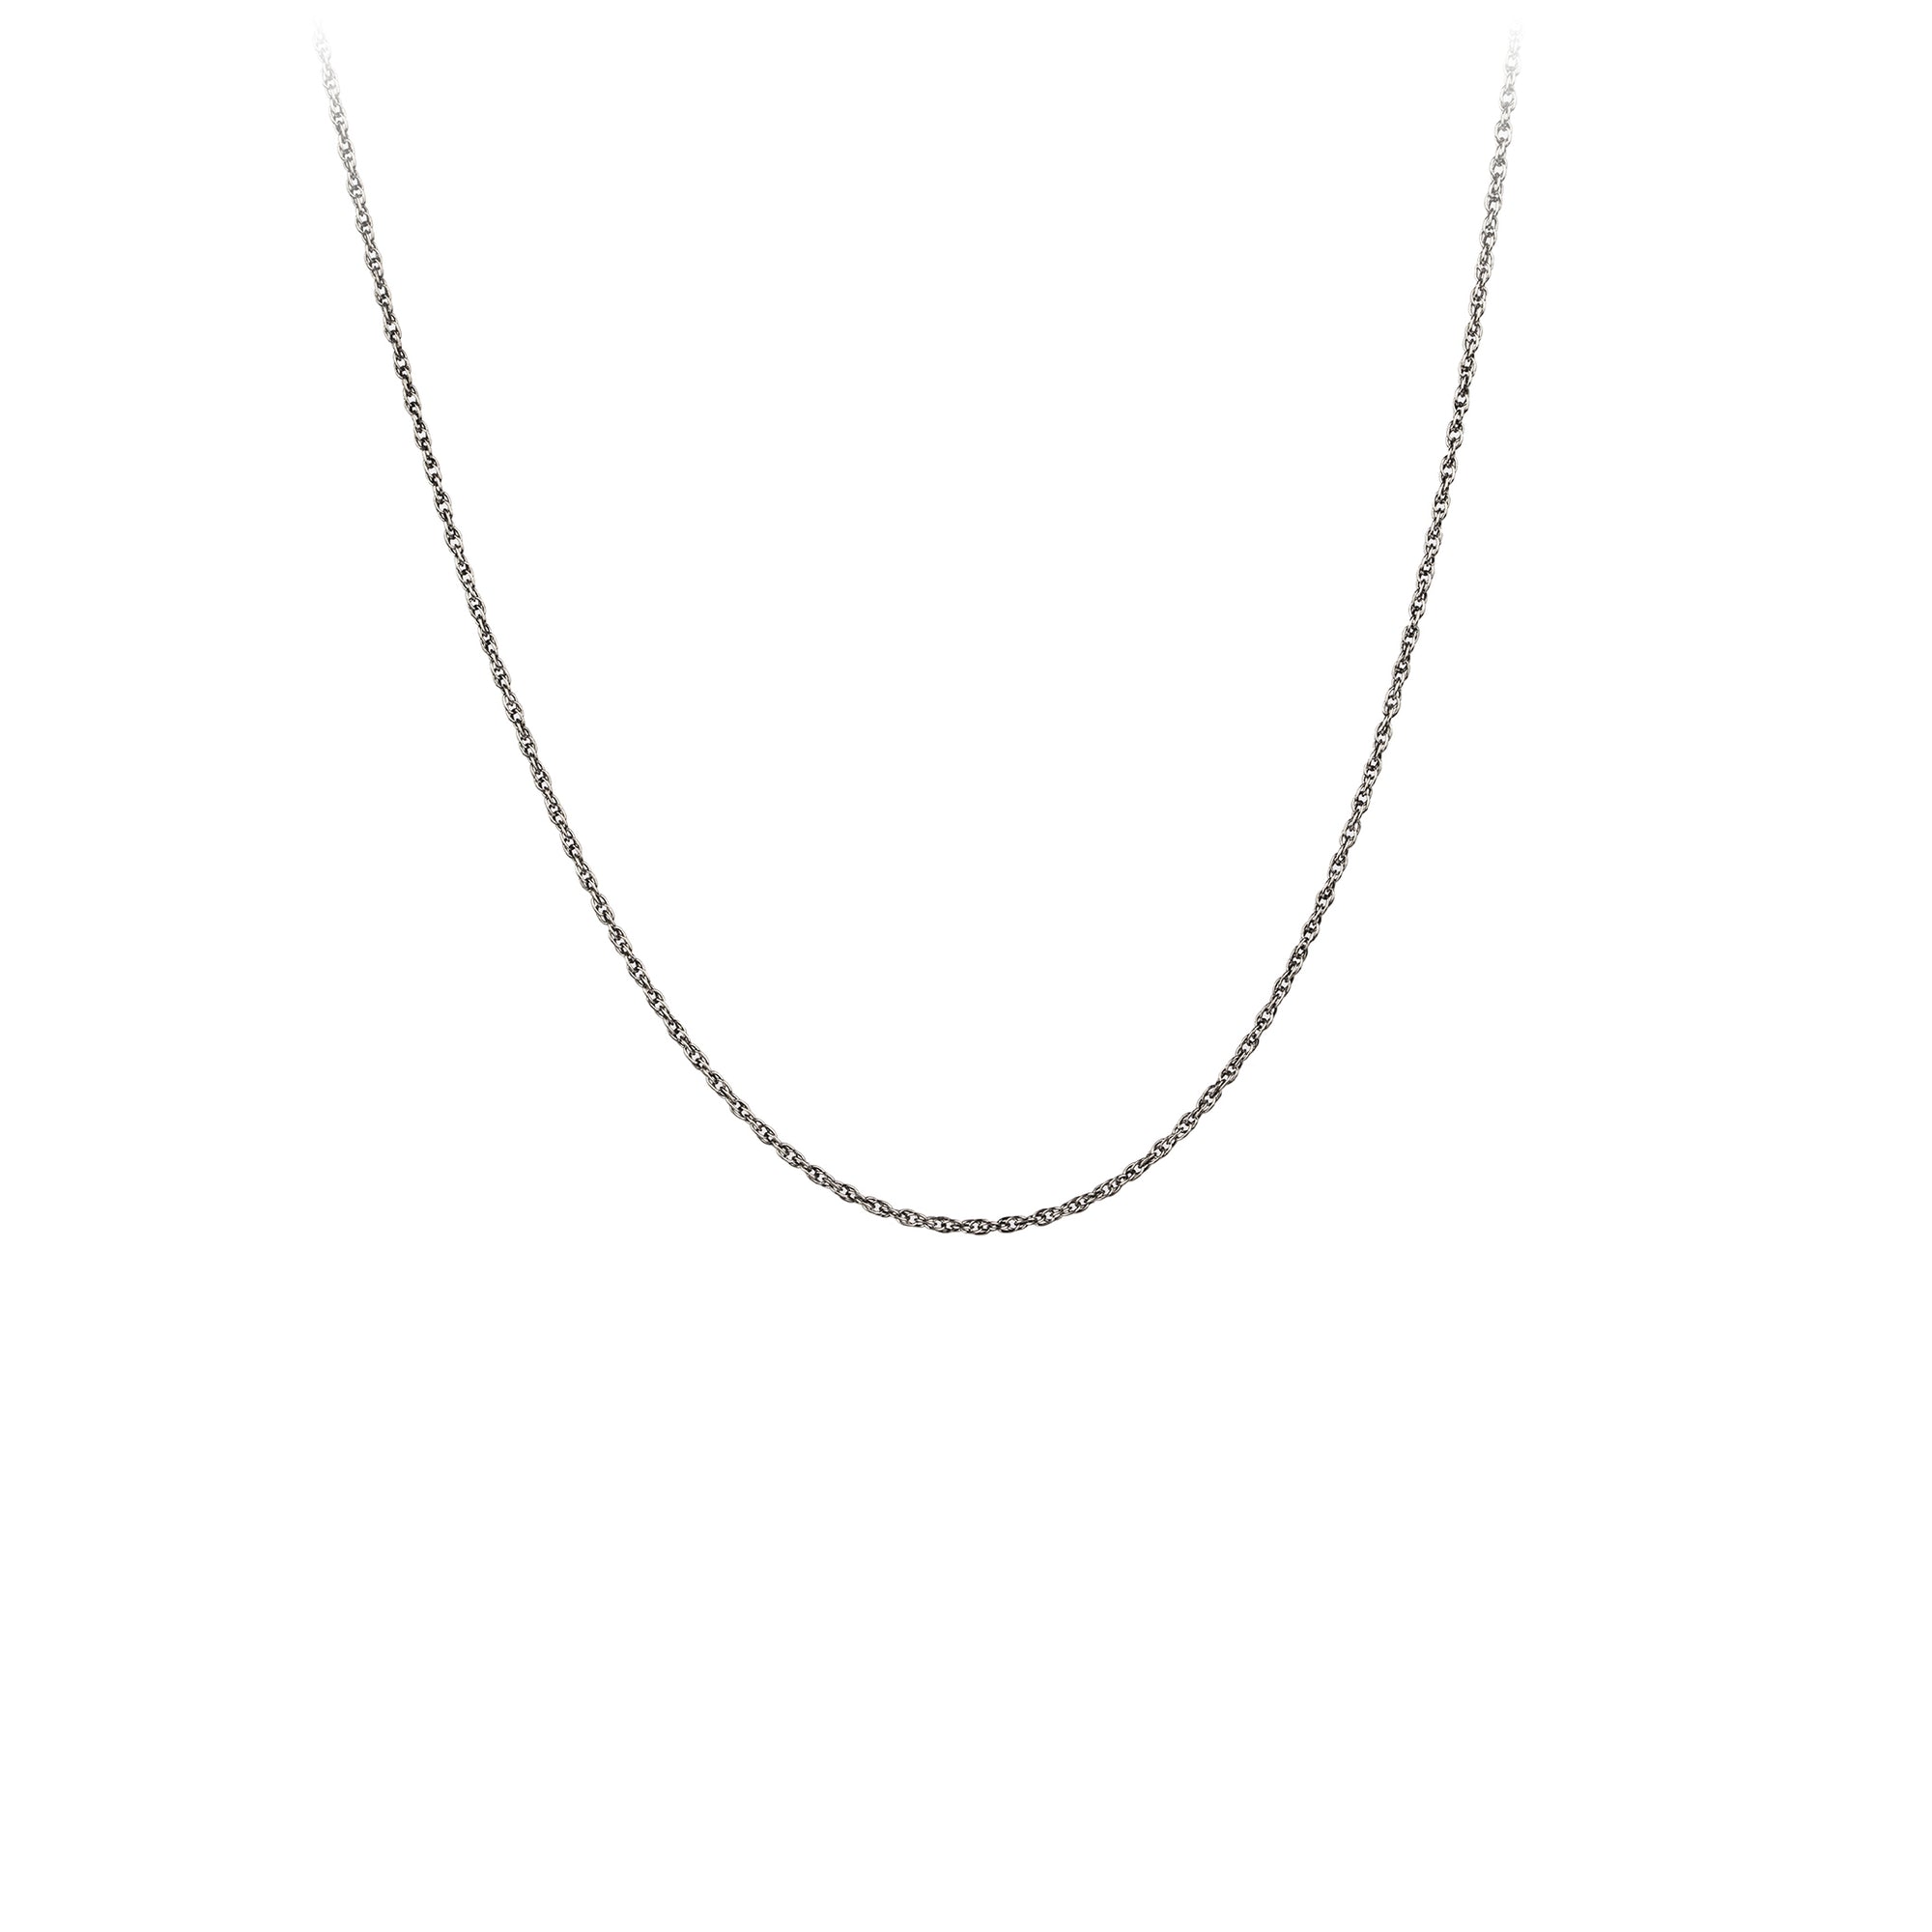 A sterling silver chain with medium french rope links